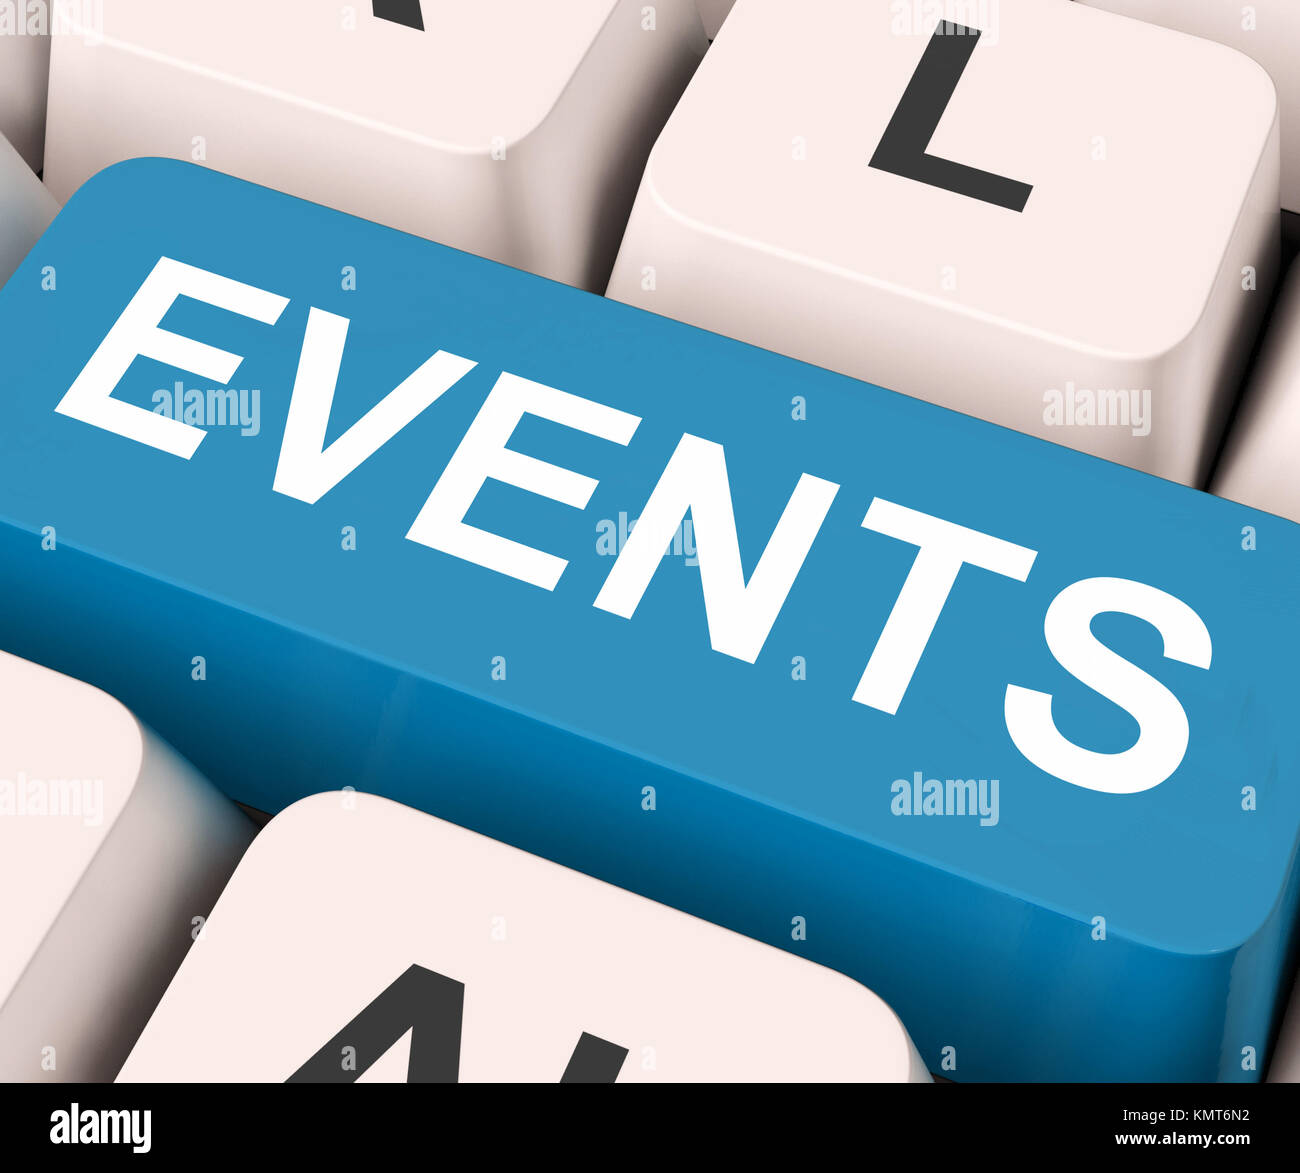 Events Key On Keyboard Meaning Occurrence, Happening Or Incident Stock Photo